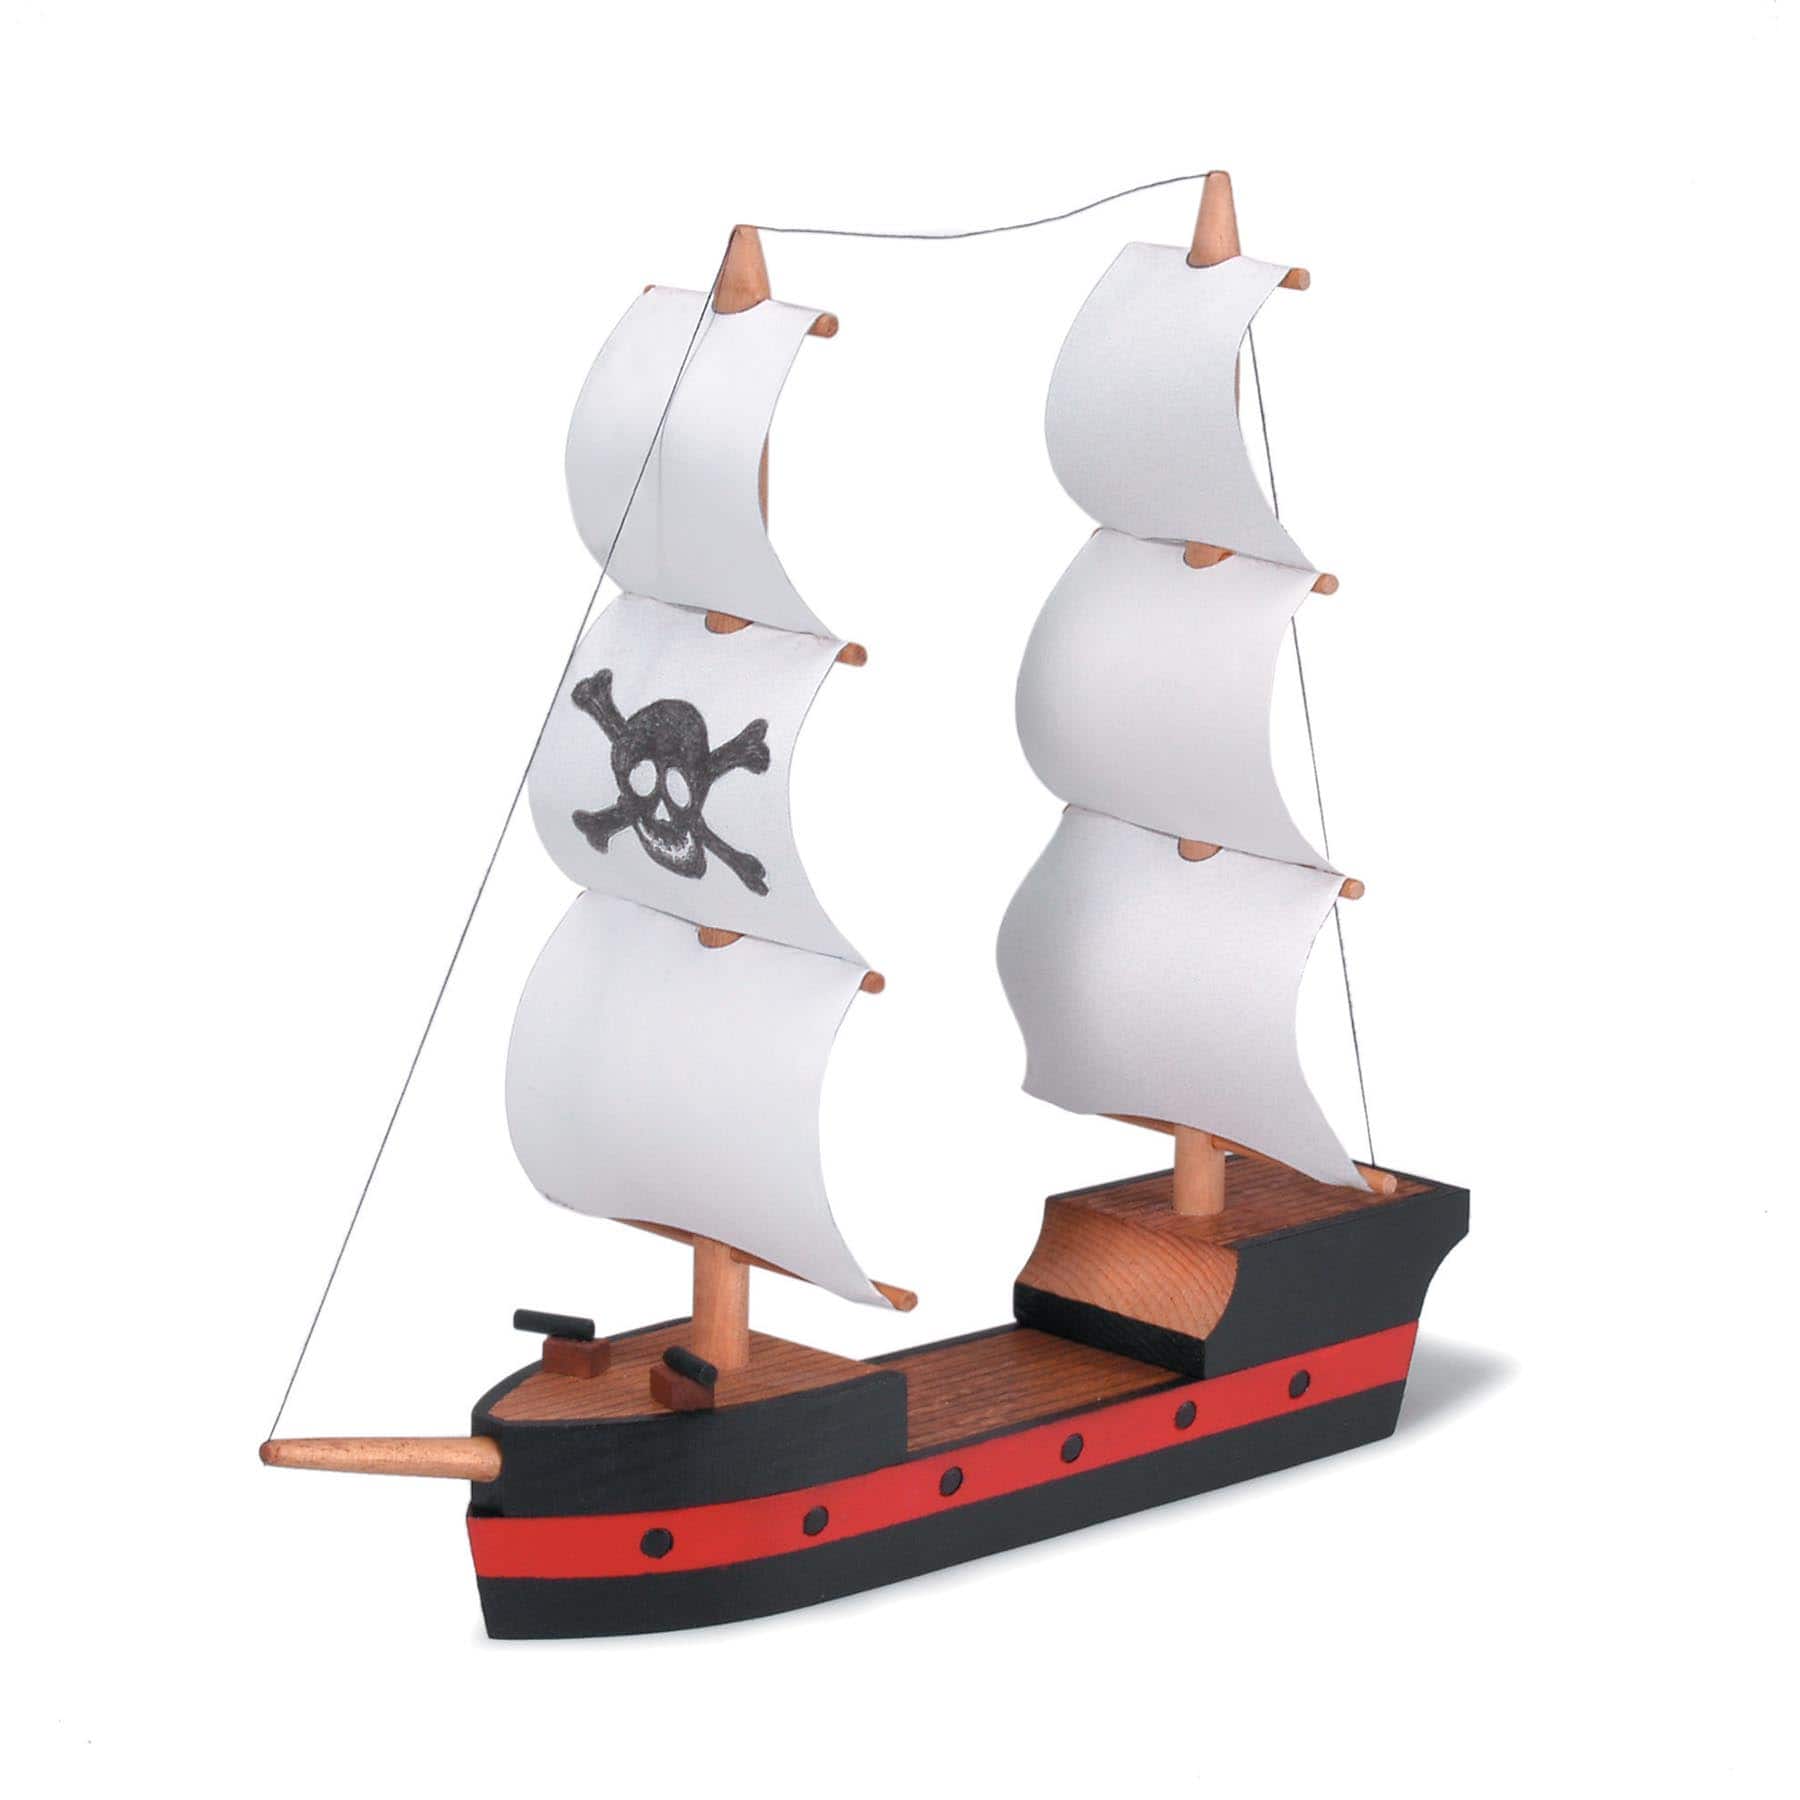 Find the Darice® Pirate Ship Wood Model Kit at Michaels